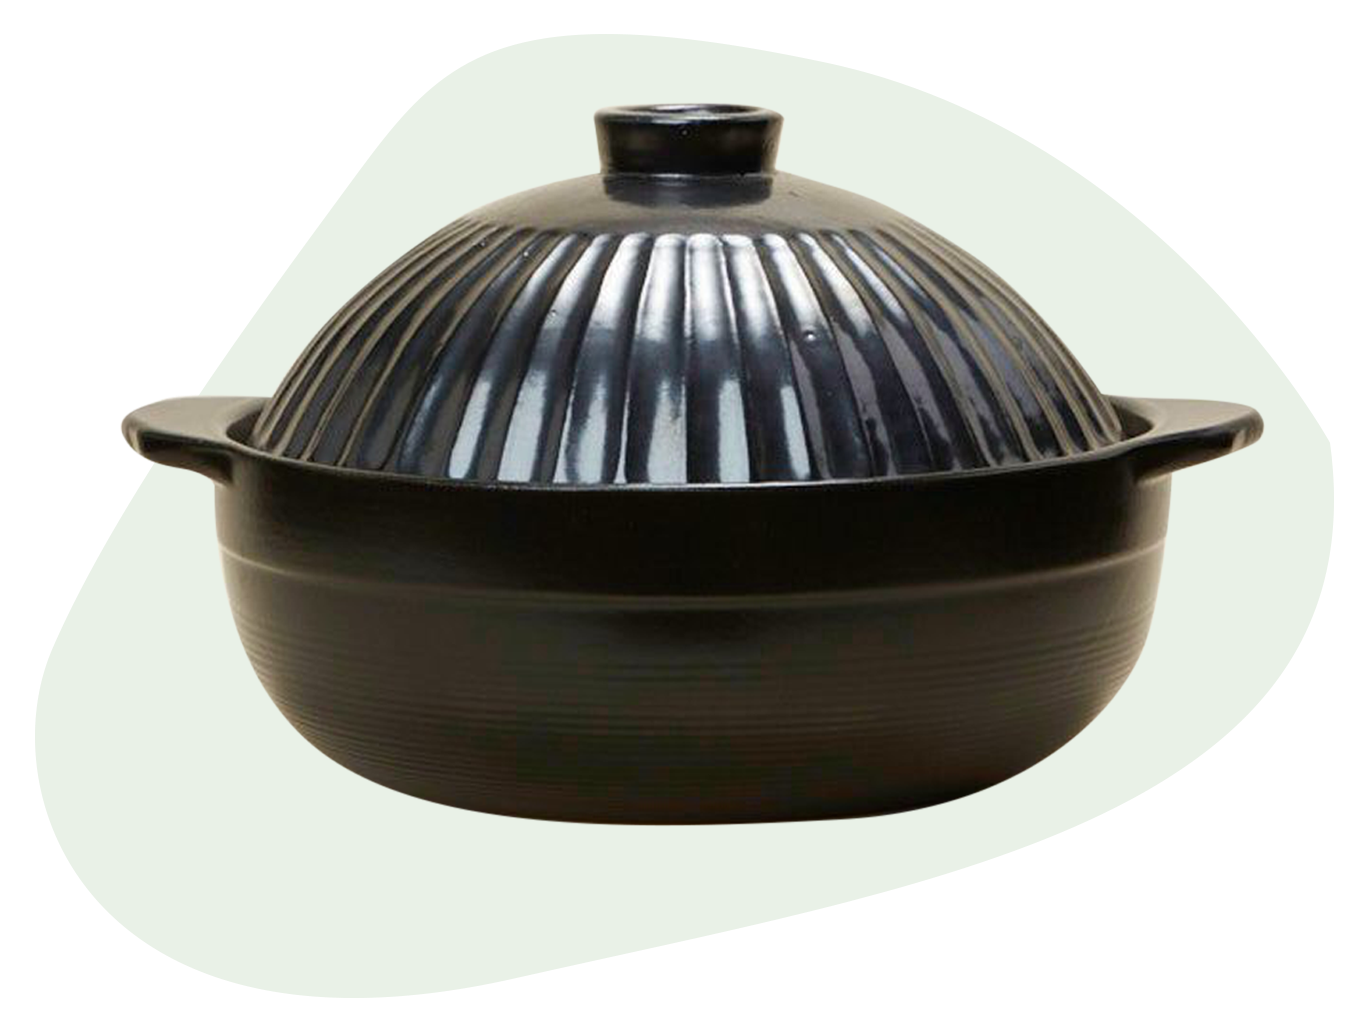 Cravings by Chrissy Teigen Cookware Donabe-Style Clay Pot 2.5-qt